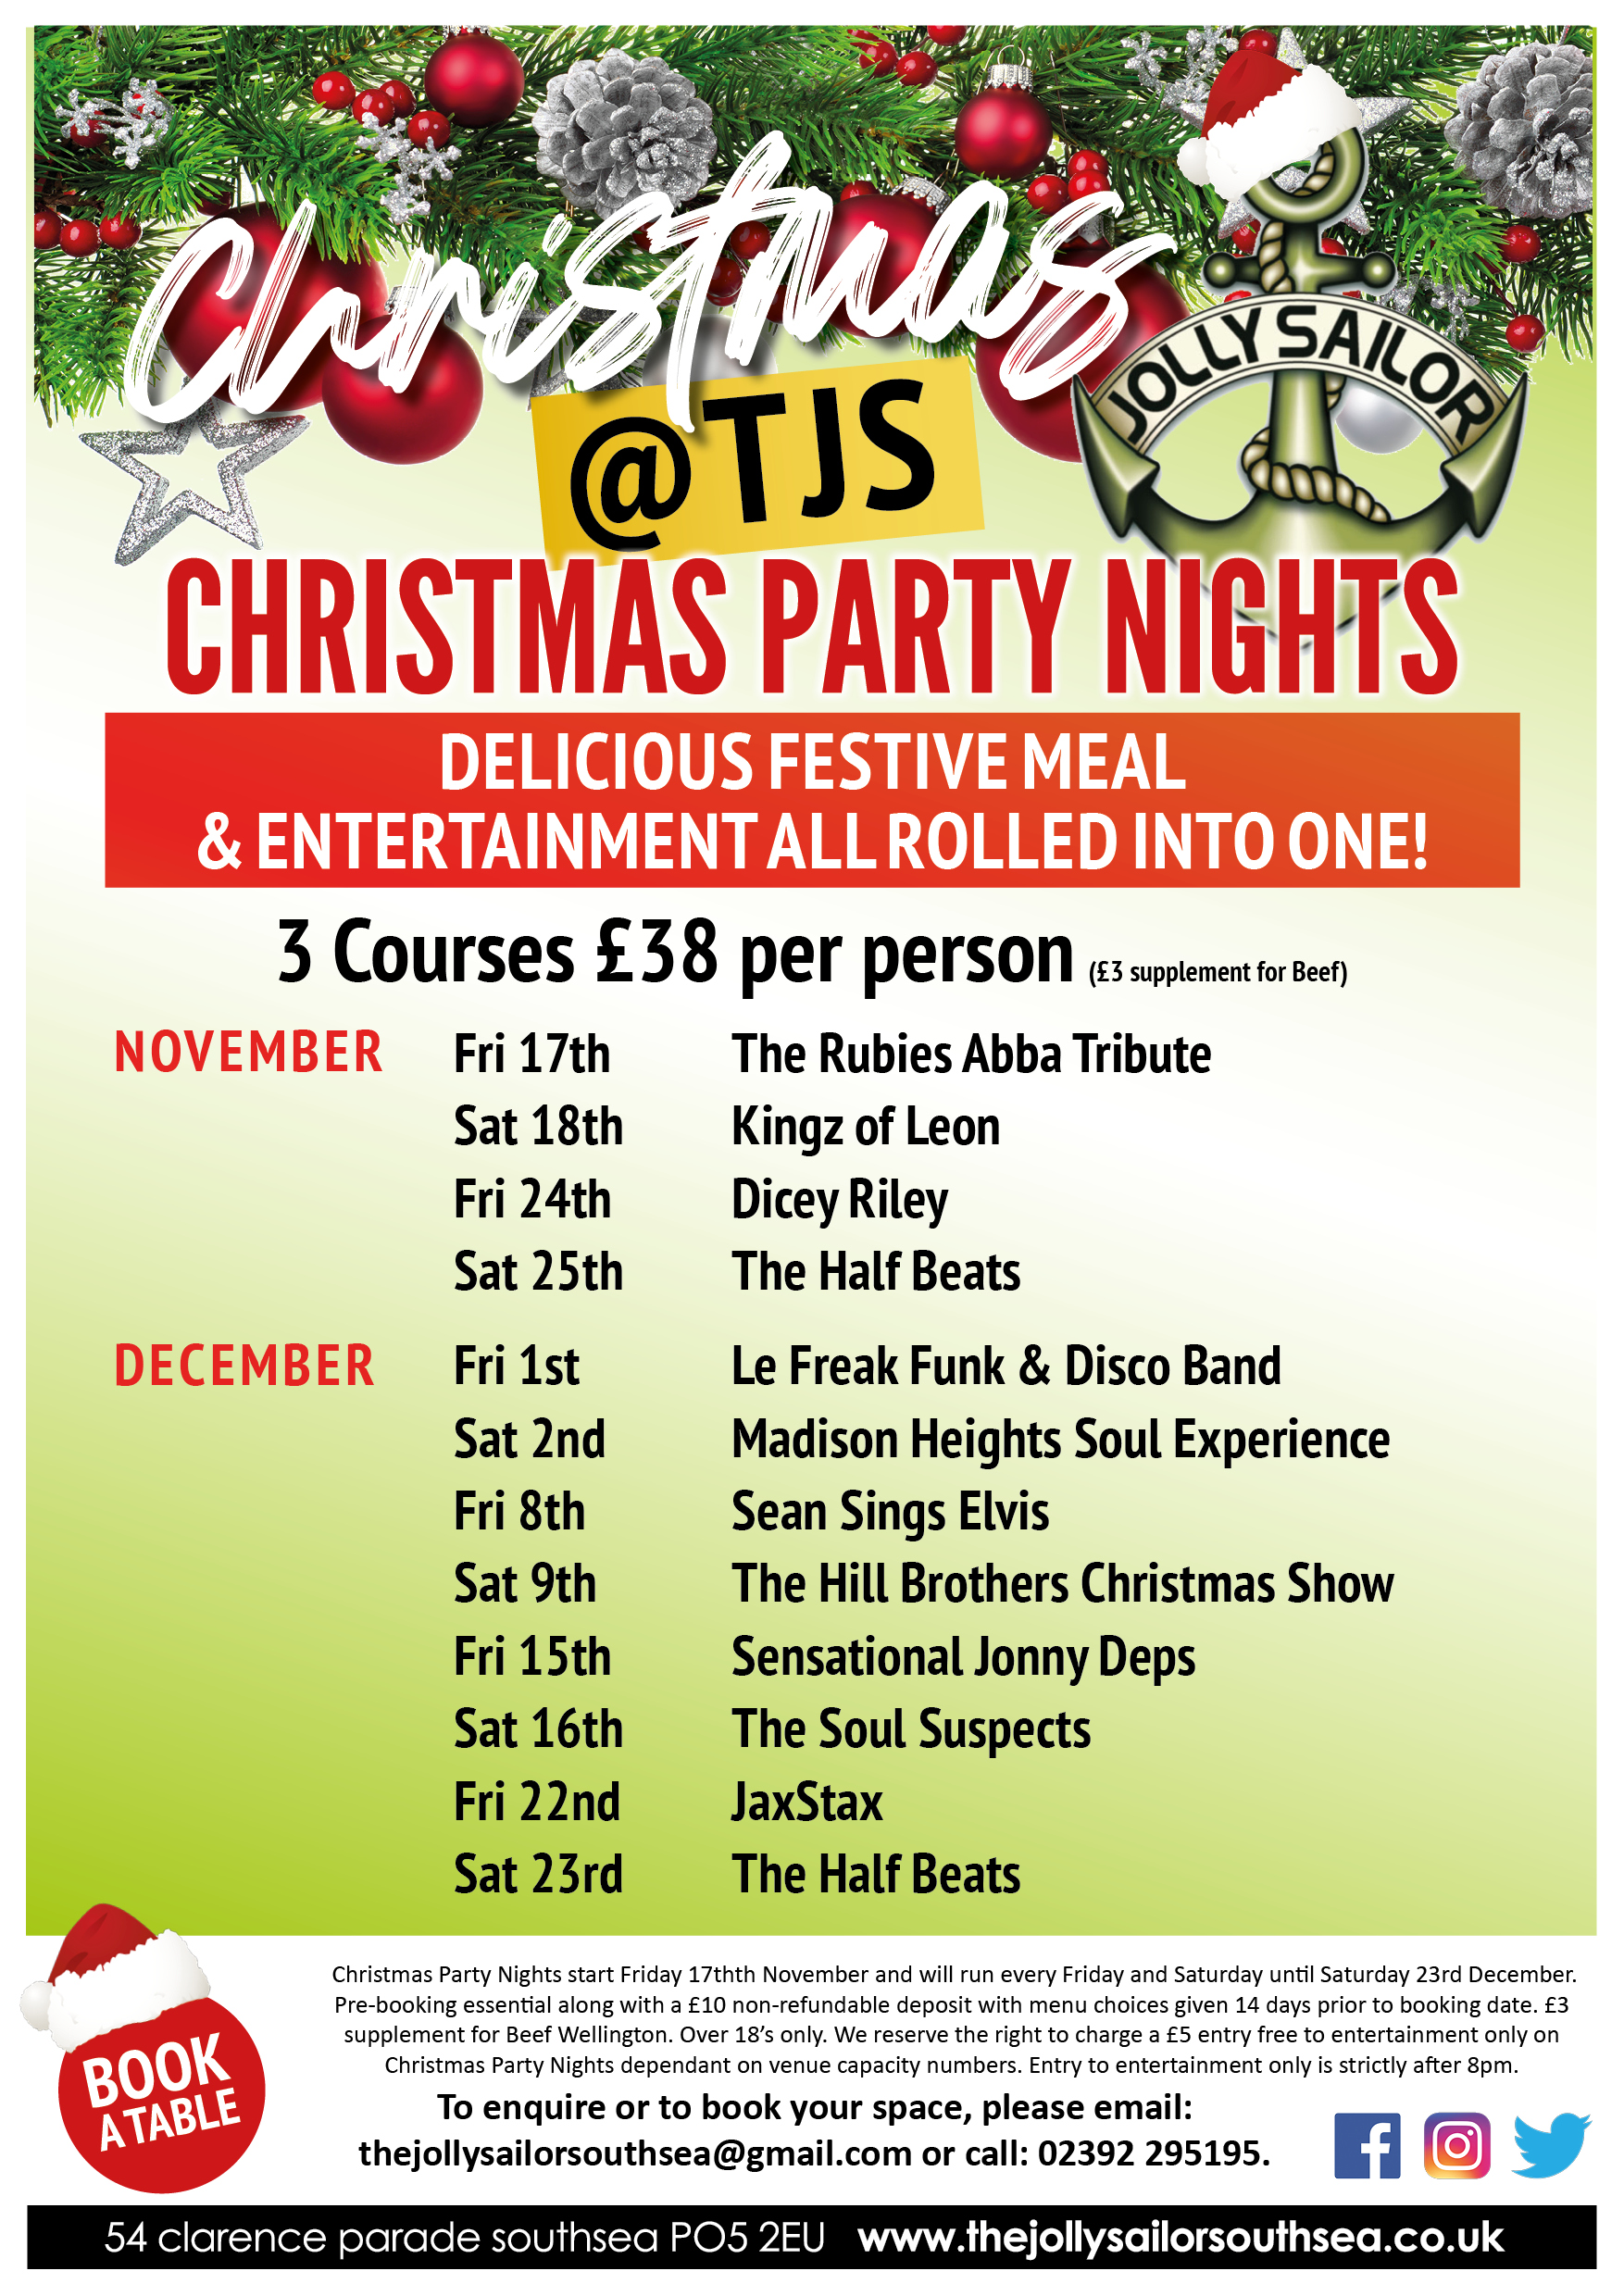 Best Bars For Christmas In Southsea - Christmas Party Nights At The Jolly Sailor !